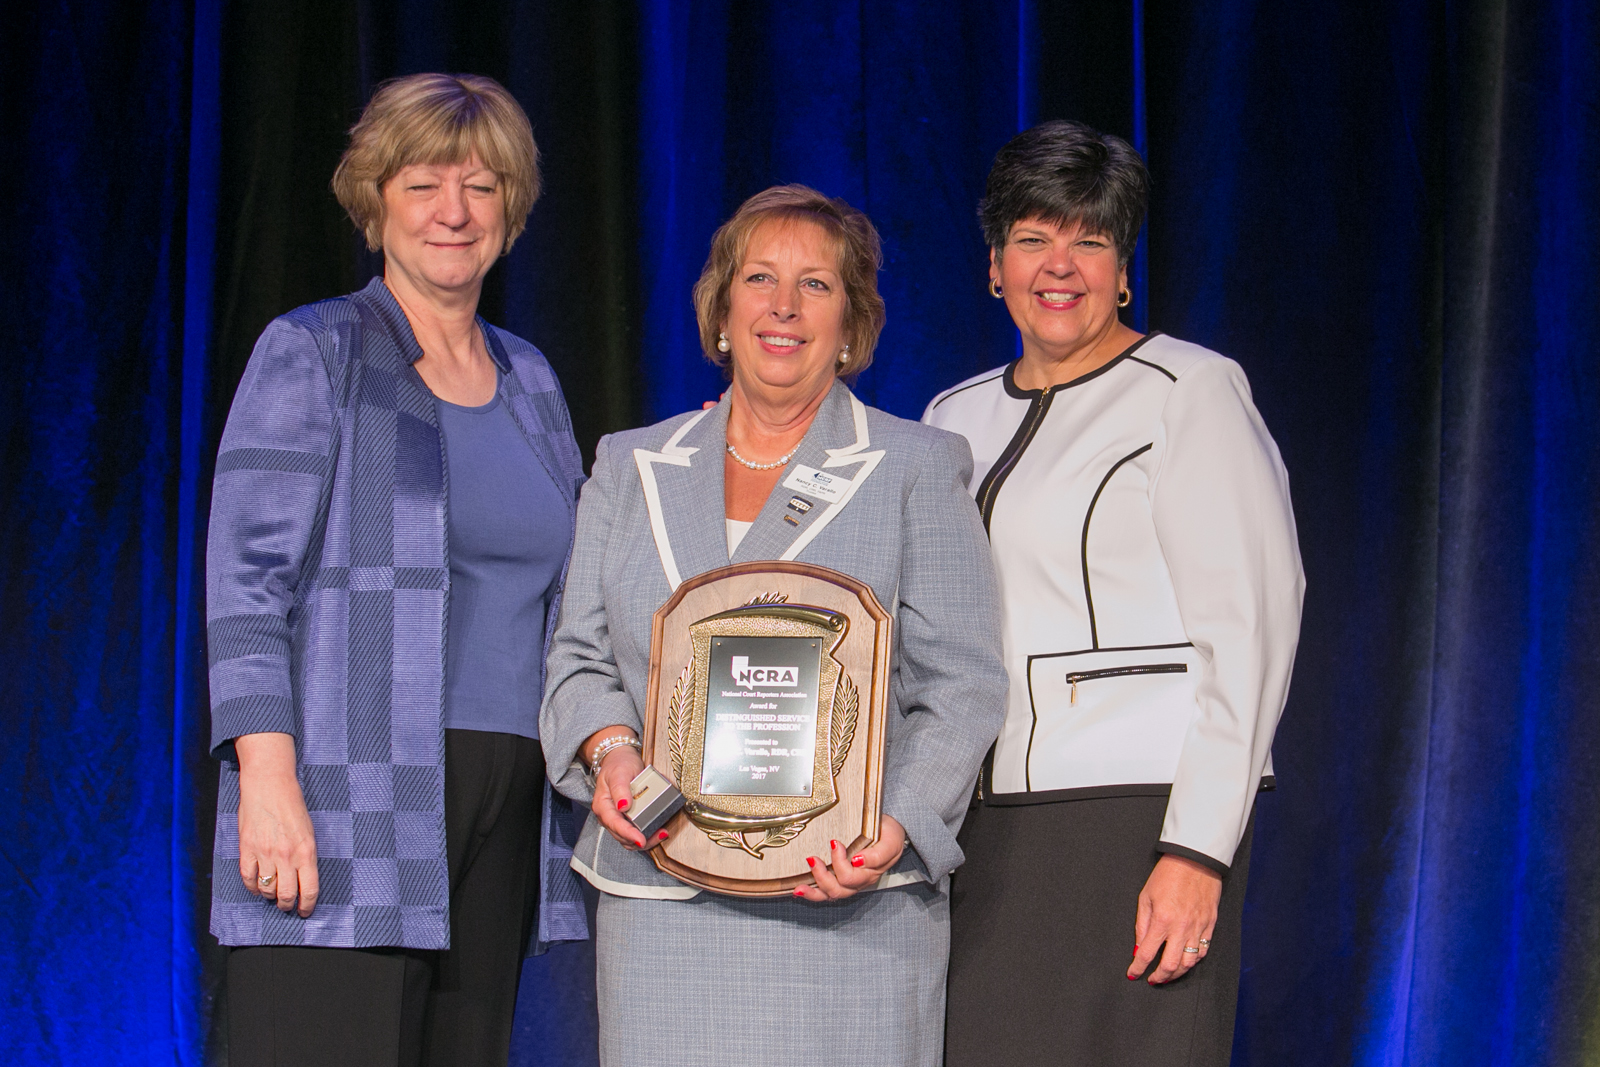 Honor someone with NCRA’s highest award: The Distinguished Service Award